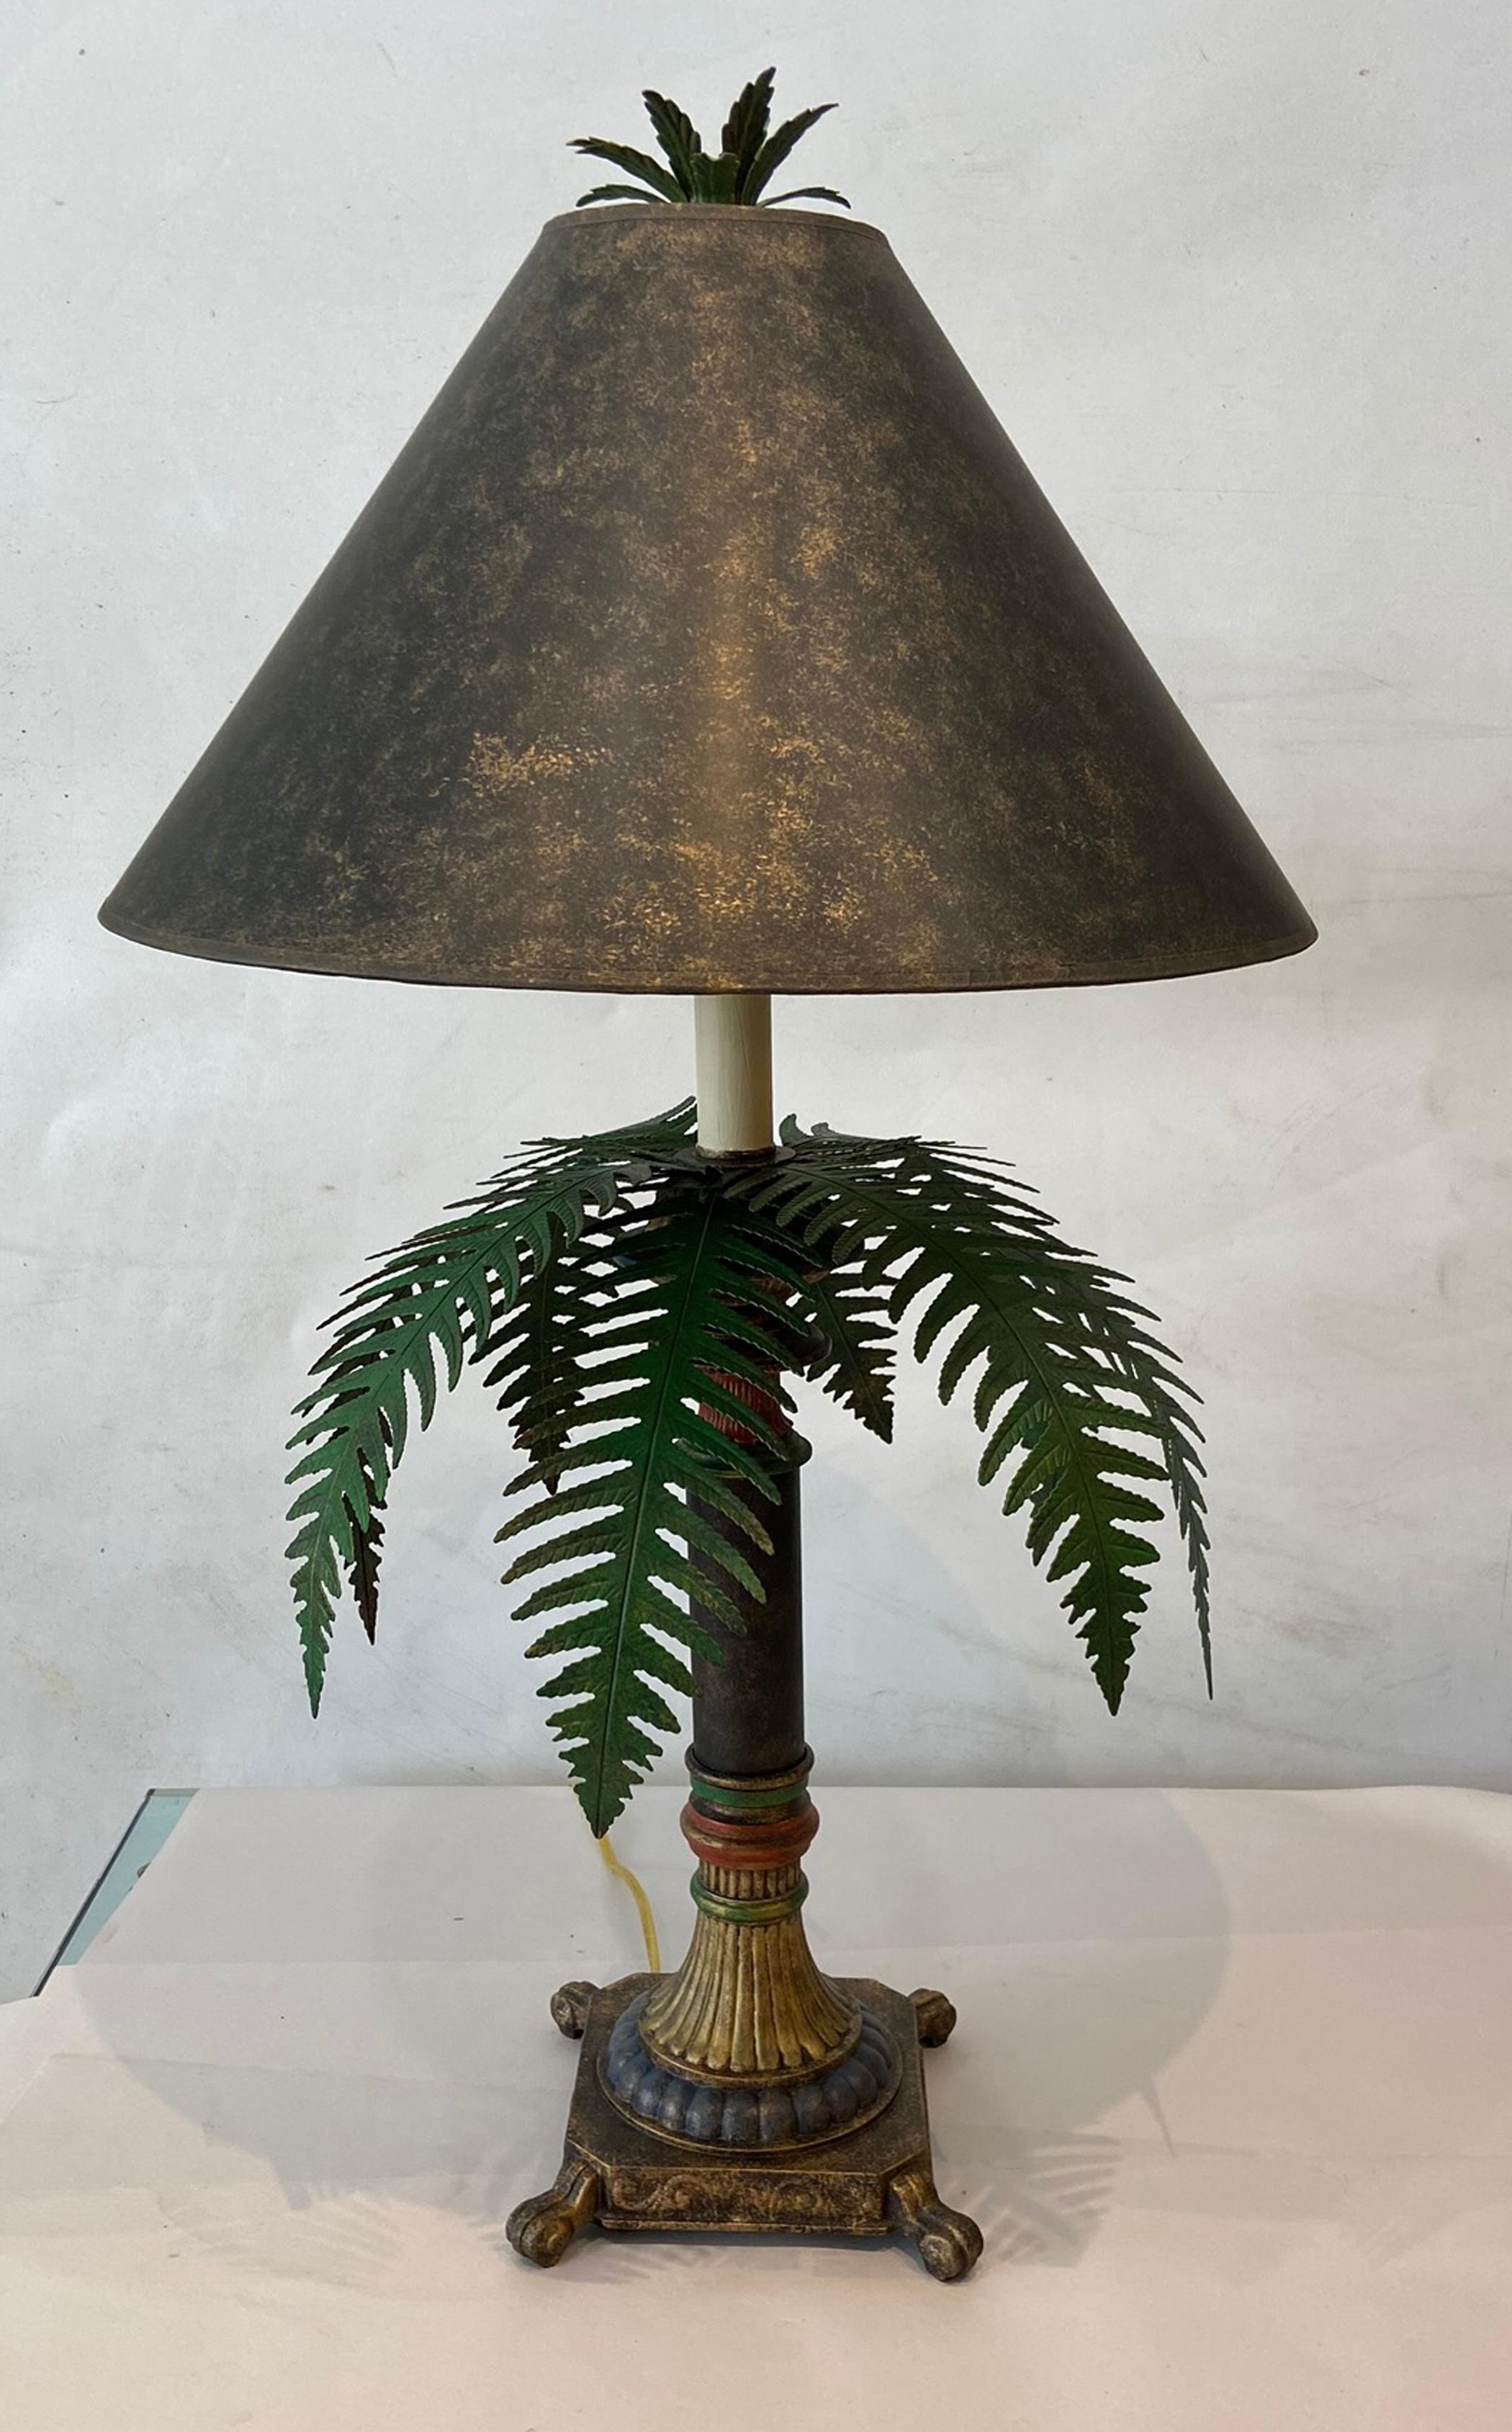 Pair of tole ware table lamps probably made by Maitland Smith. Well-made heavy lamps in very good condition. Tole-ware cut metal leafs on a heavy metal stem and base. Recently rewired. Ready to be used.